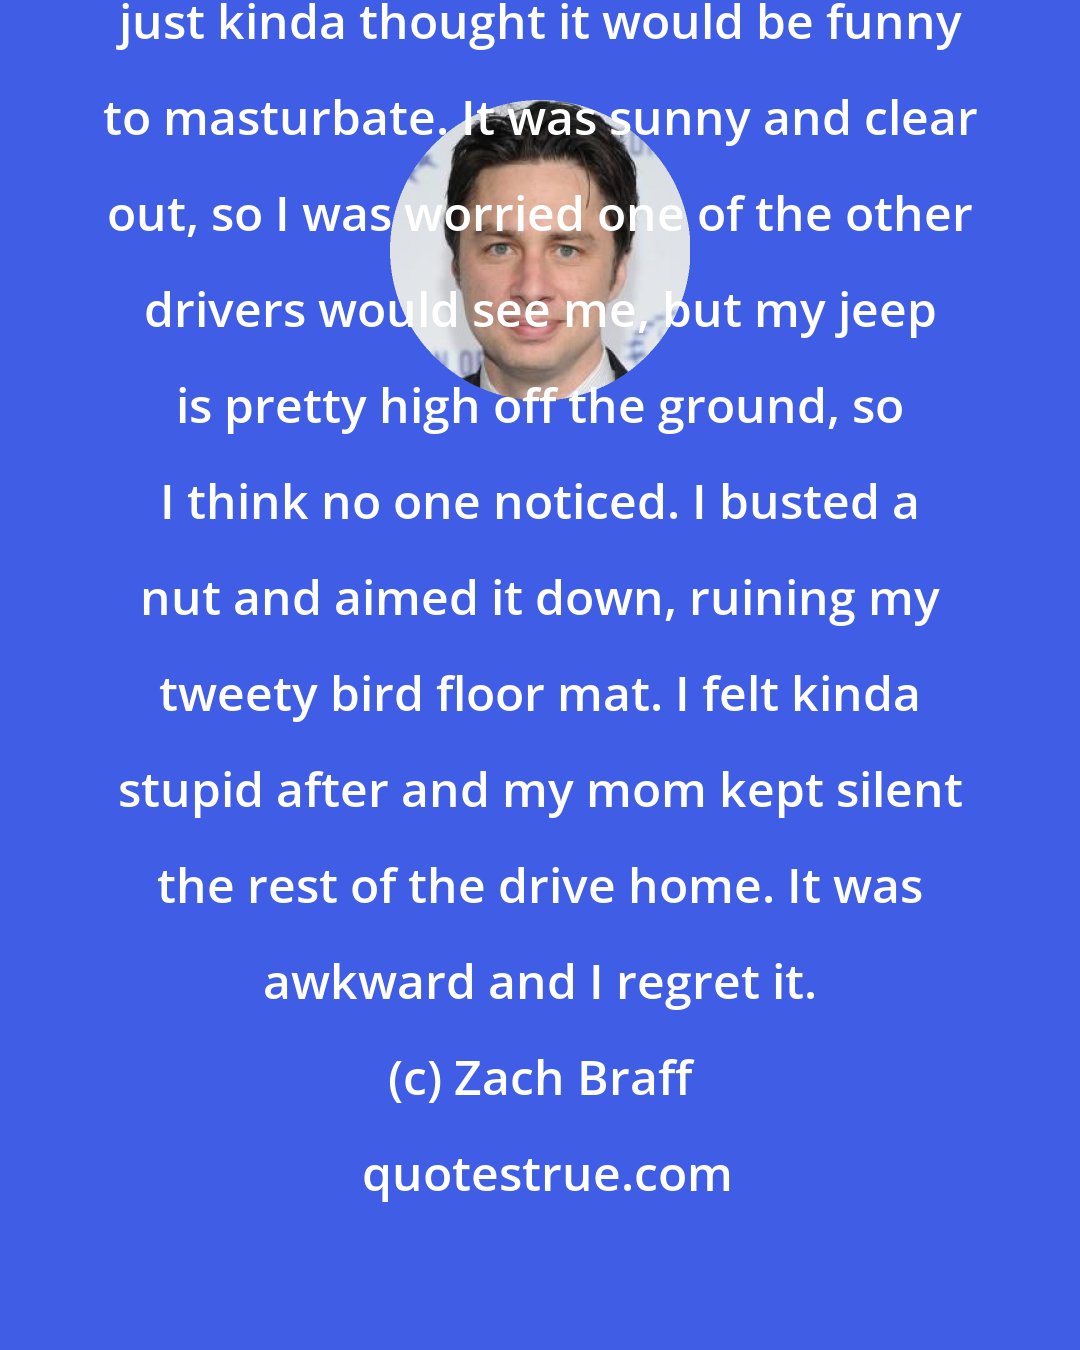 Zach Braff: I was stuck in traffic one day and just kinda thought it would be funny to masturbate. It was sunny and clear out, so I was worried one of the other drivers would see me, but my jeep is pretty high off the ground, so I think no one noticed. I busted a nut and aimed it down, ruining my tweety bird floor mat. I felt kinda stupid after and my mom kept silent the rest of the drive home. It was awkward and I regret it.